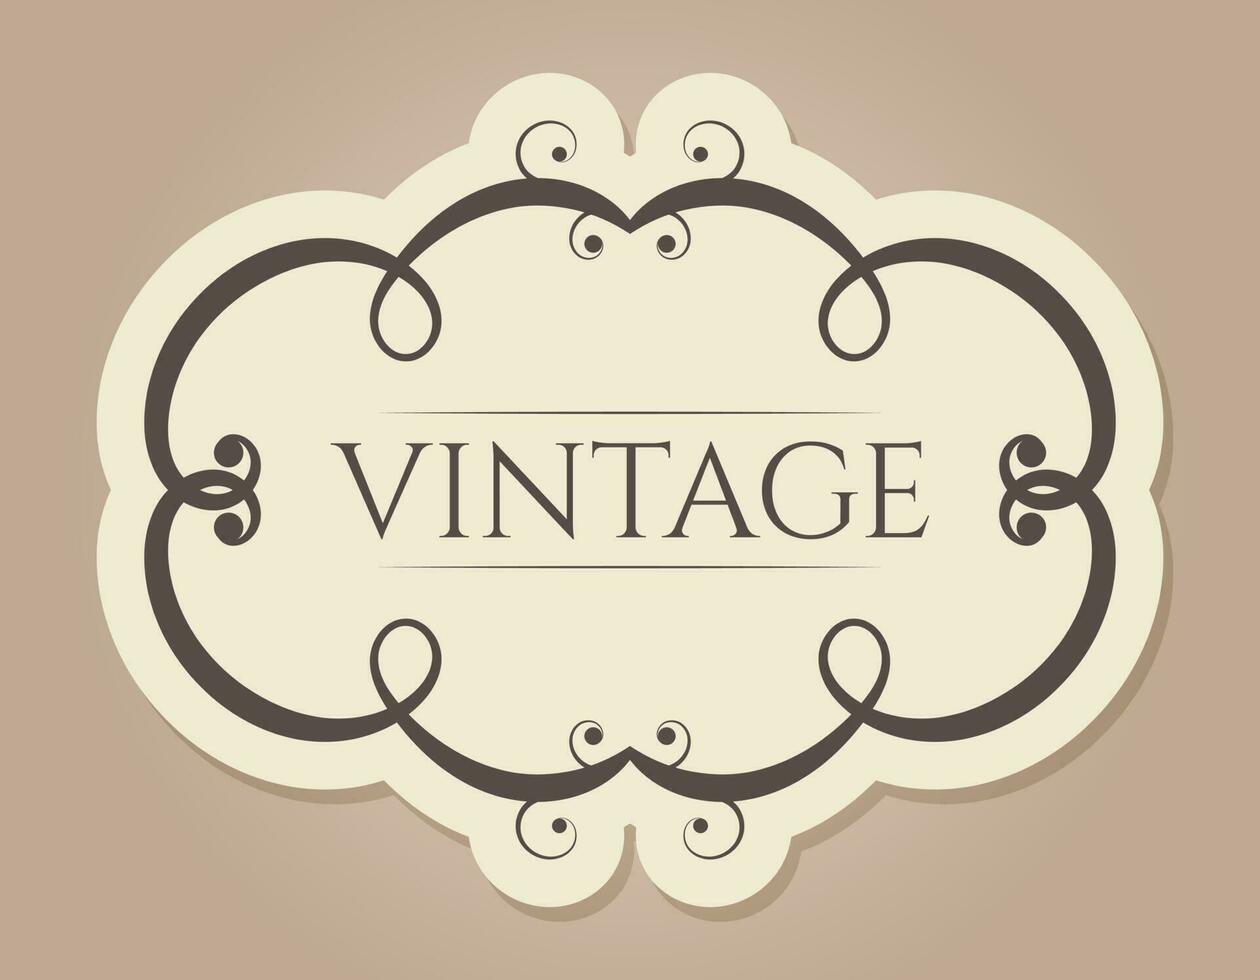 Old vintage banner or frame with swirls ornament, vector isolated illustration.